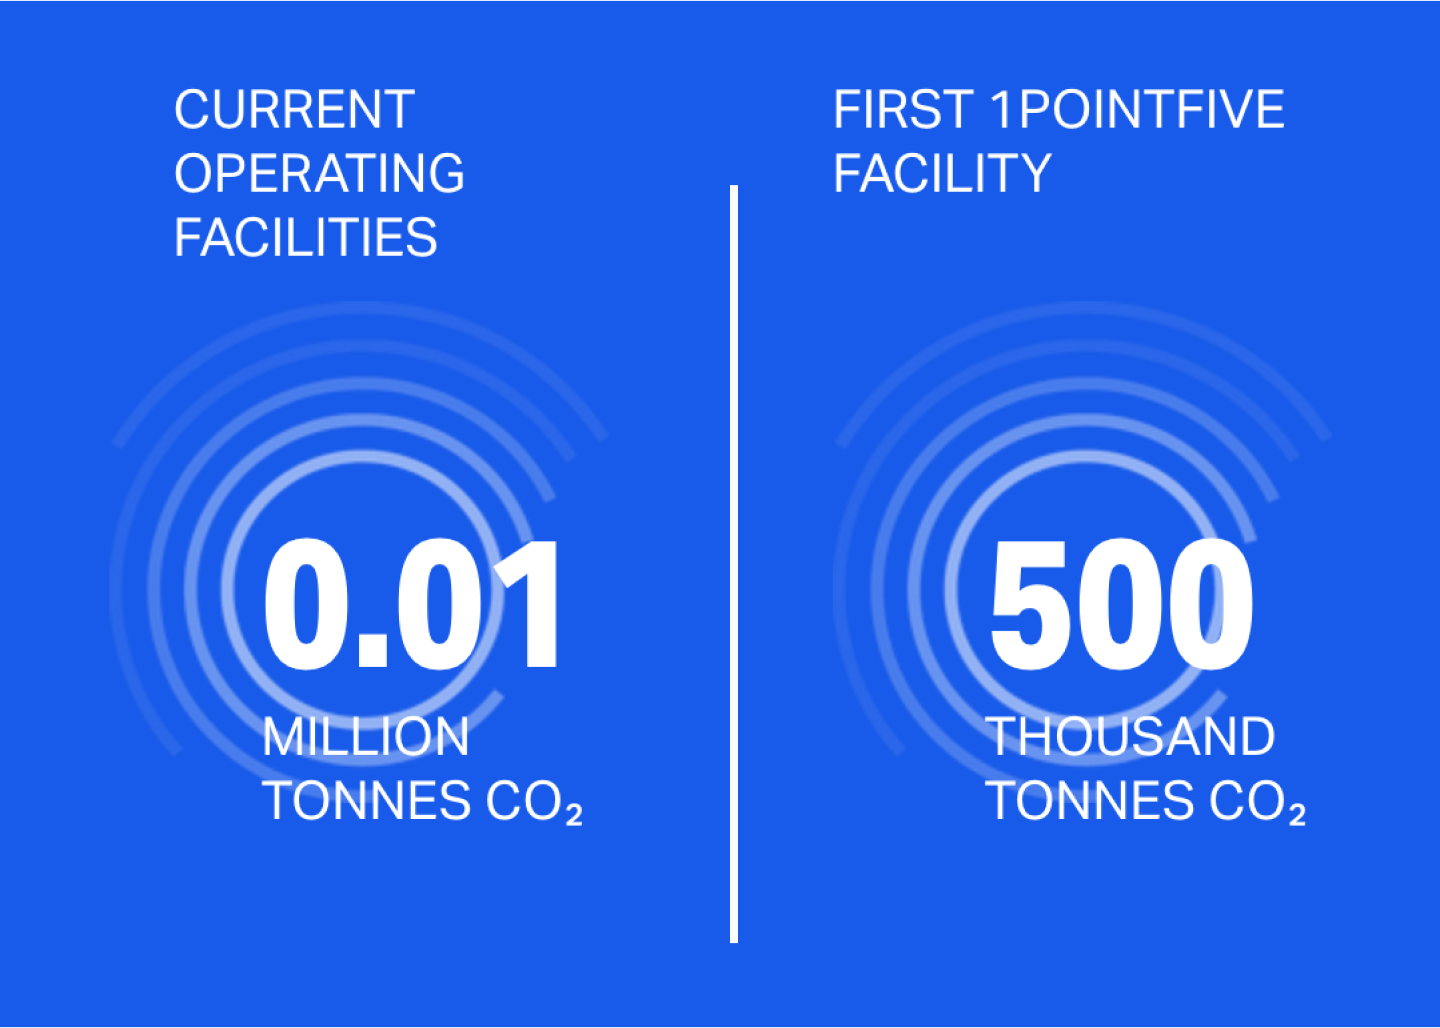 Current operating facilities: 0.01 million tonnes CO2. First 1PointFive facility: 500,000 tonnes of CO2.